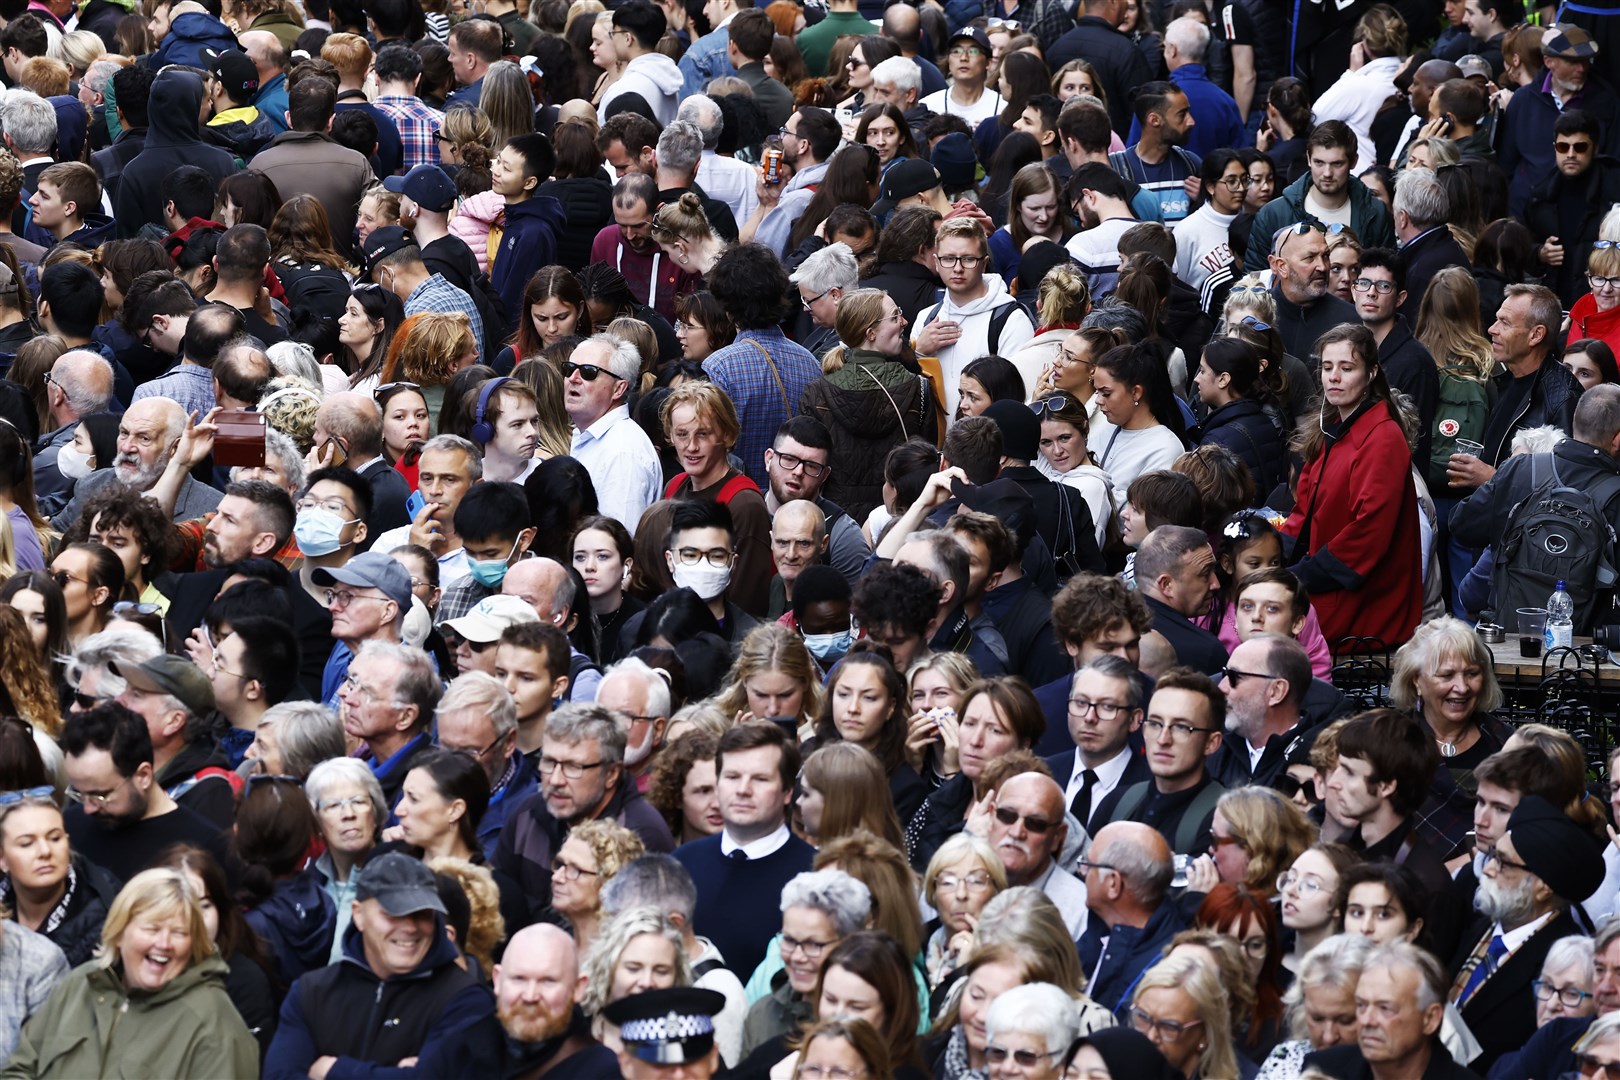 Thousands gathered along the Royal Mile to watch the procession (Jeff J Mitchell/PA)